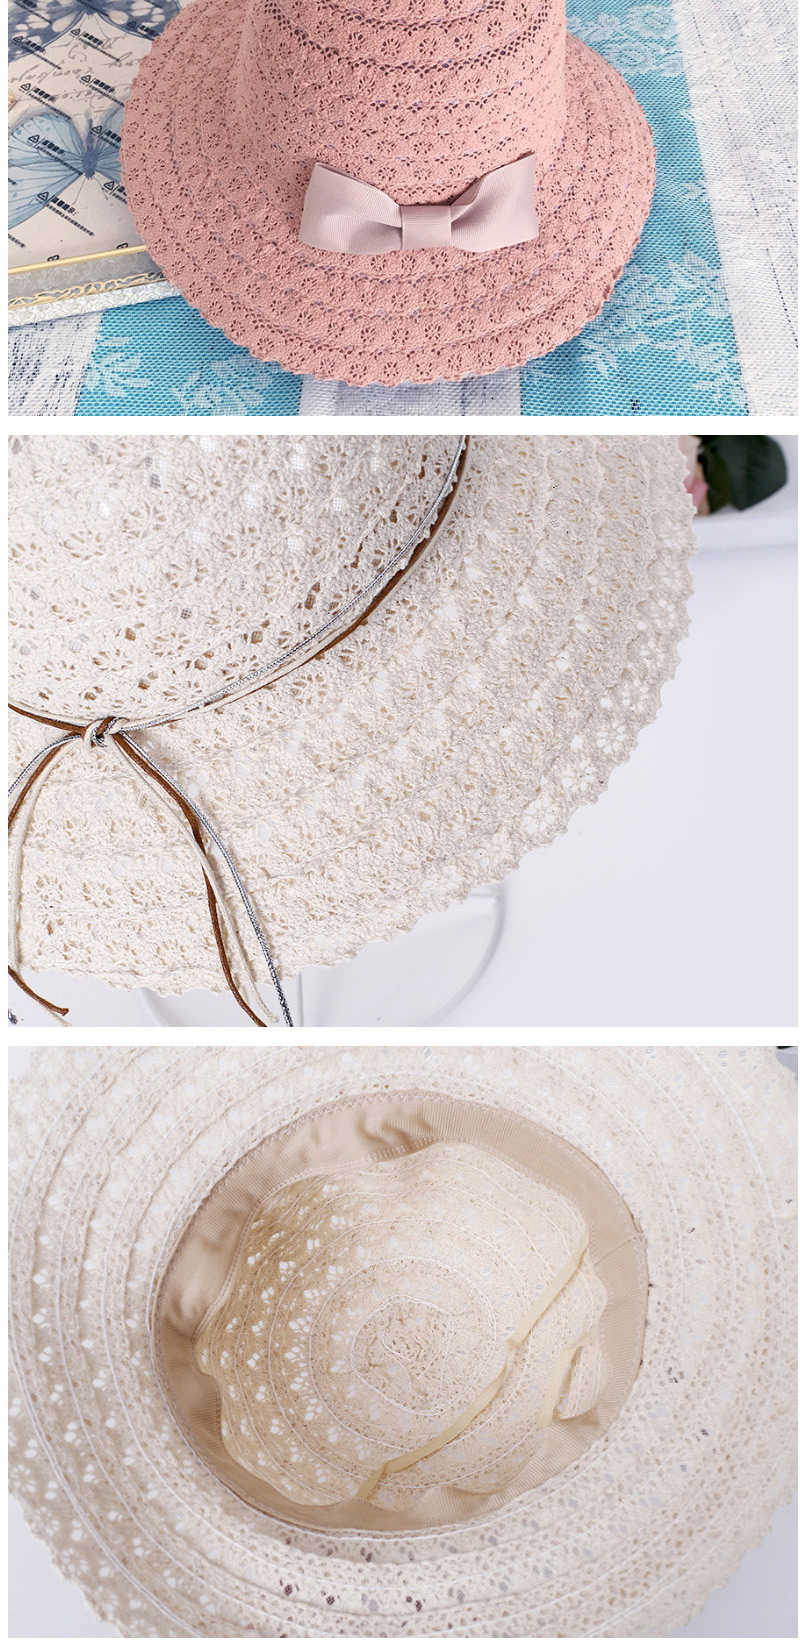 Fashion Light Pink Hollow Out Design Bowknot Decorated Hat,Sun Hats